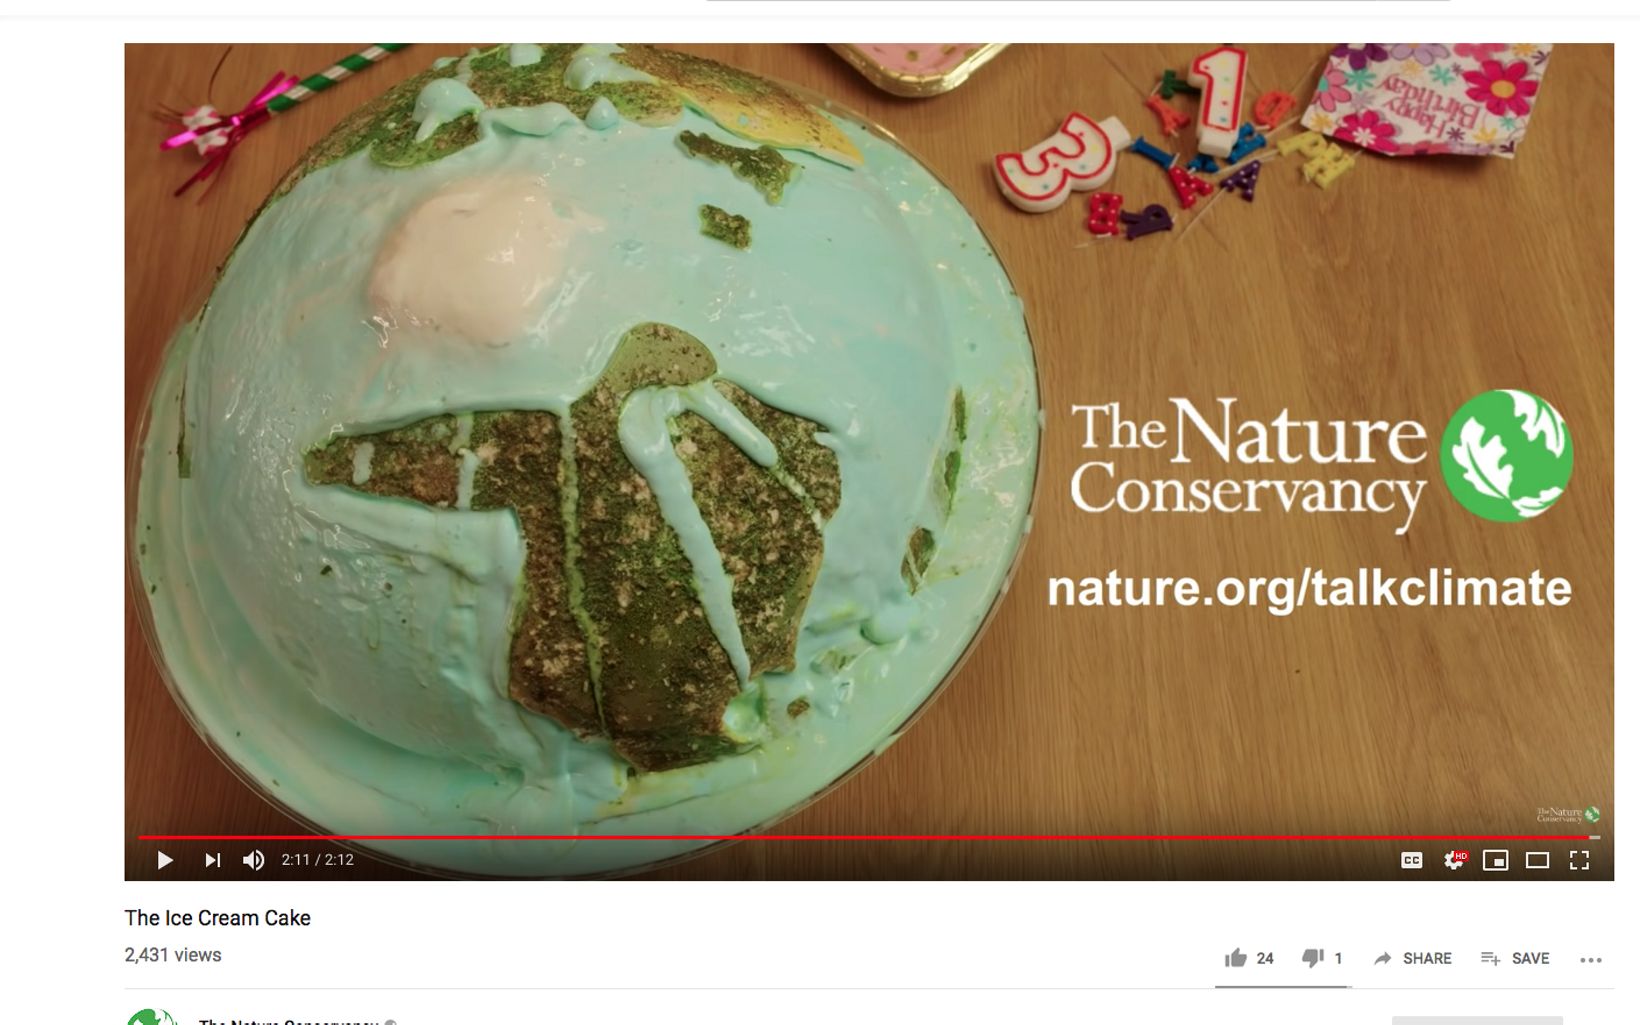 
                
                  nature.org/talkclimate vanity URL What happens when a Hollywood comedy writer parodies our climate pledge? A hilarious ice cream cake skit that leaves you wanting to take action. Talking about climate change doesn’t have to be difficult. Take our pledge and get useful tips: https://www.nature.org/talkclimate
                  
                
              